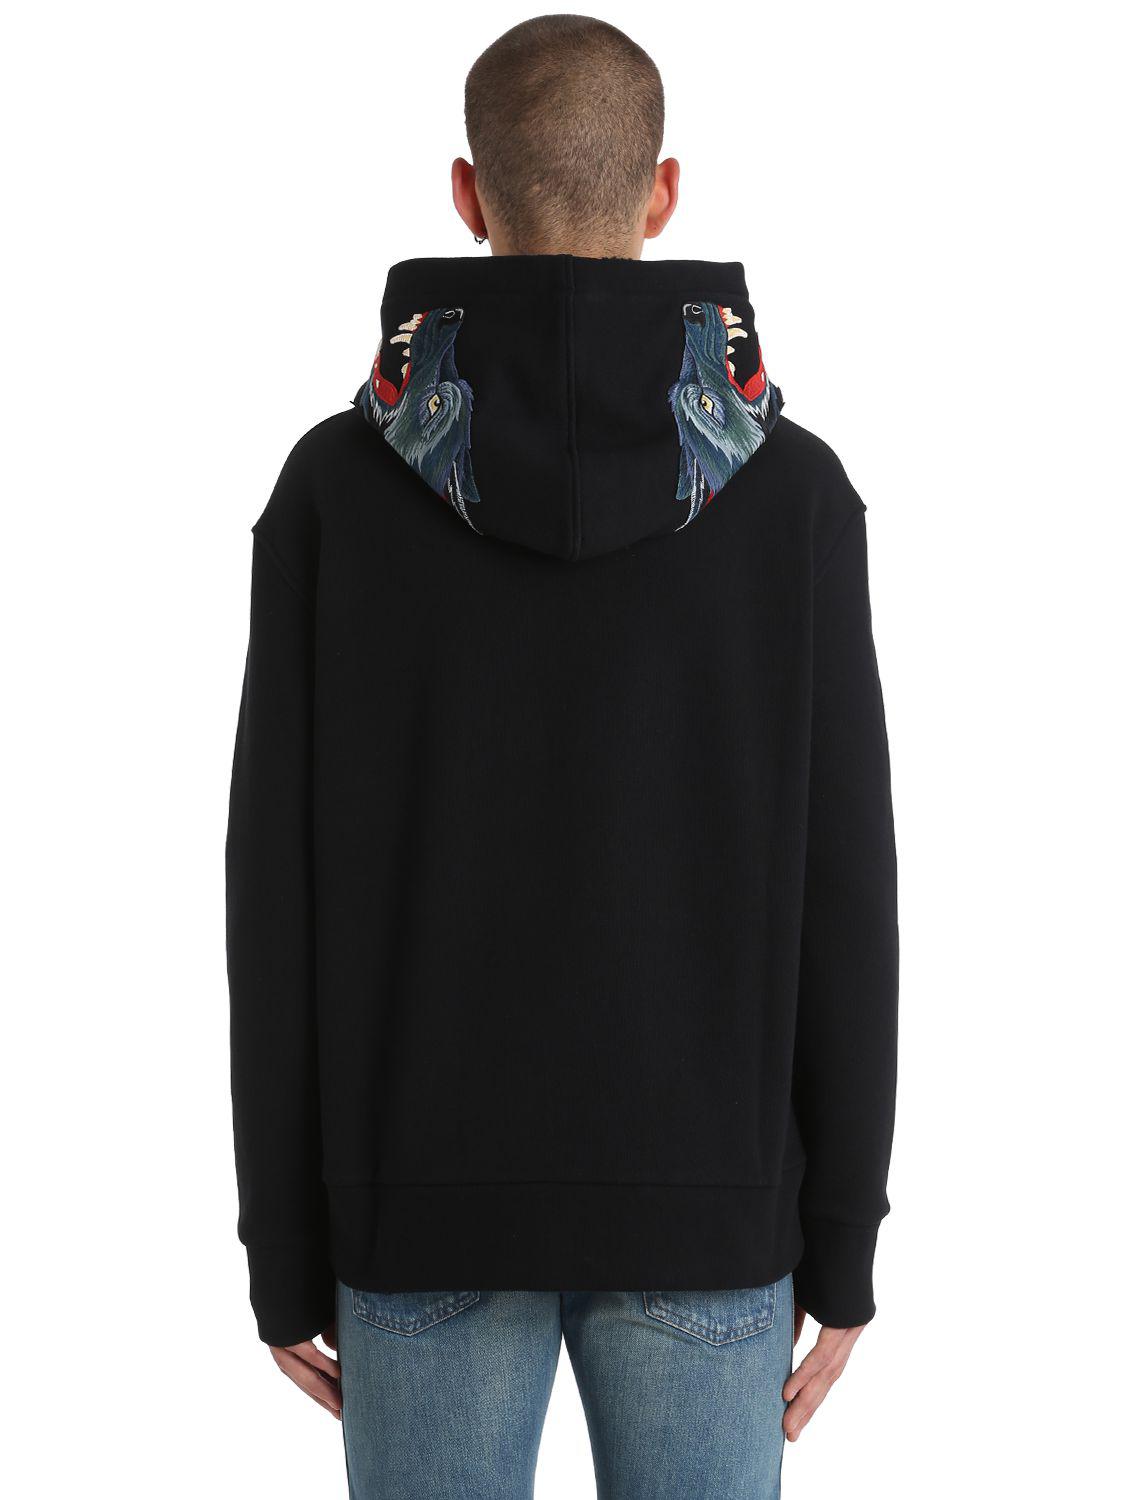 Gucci Wolf Patches Hooded Cotton Sweatshirt in Black for Men - Lyst